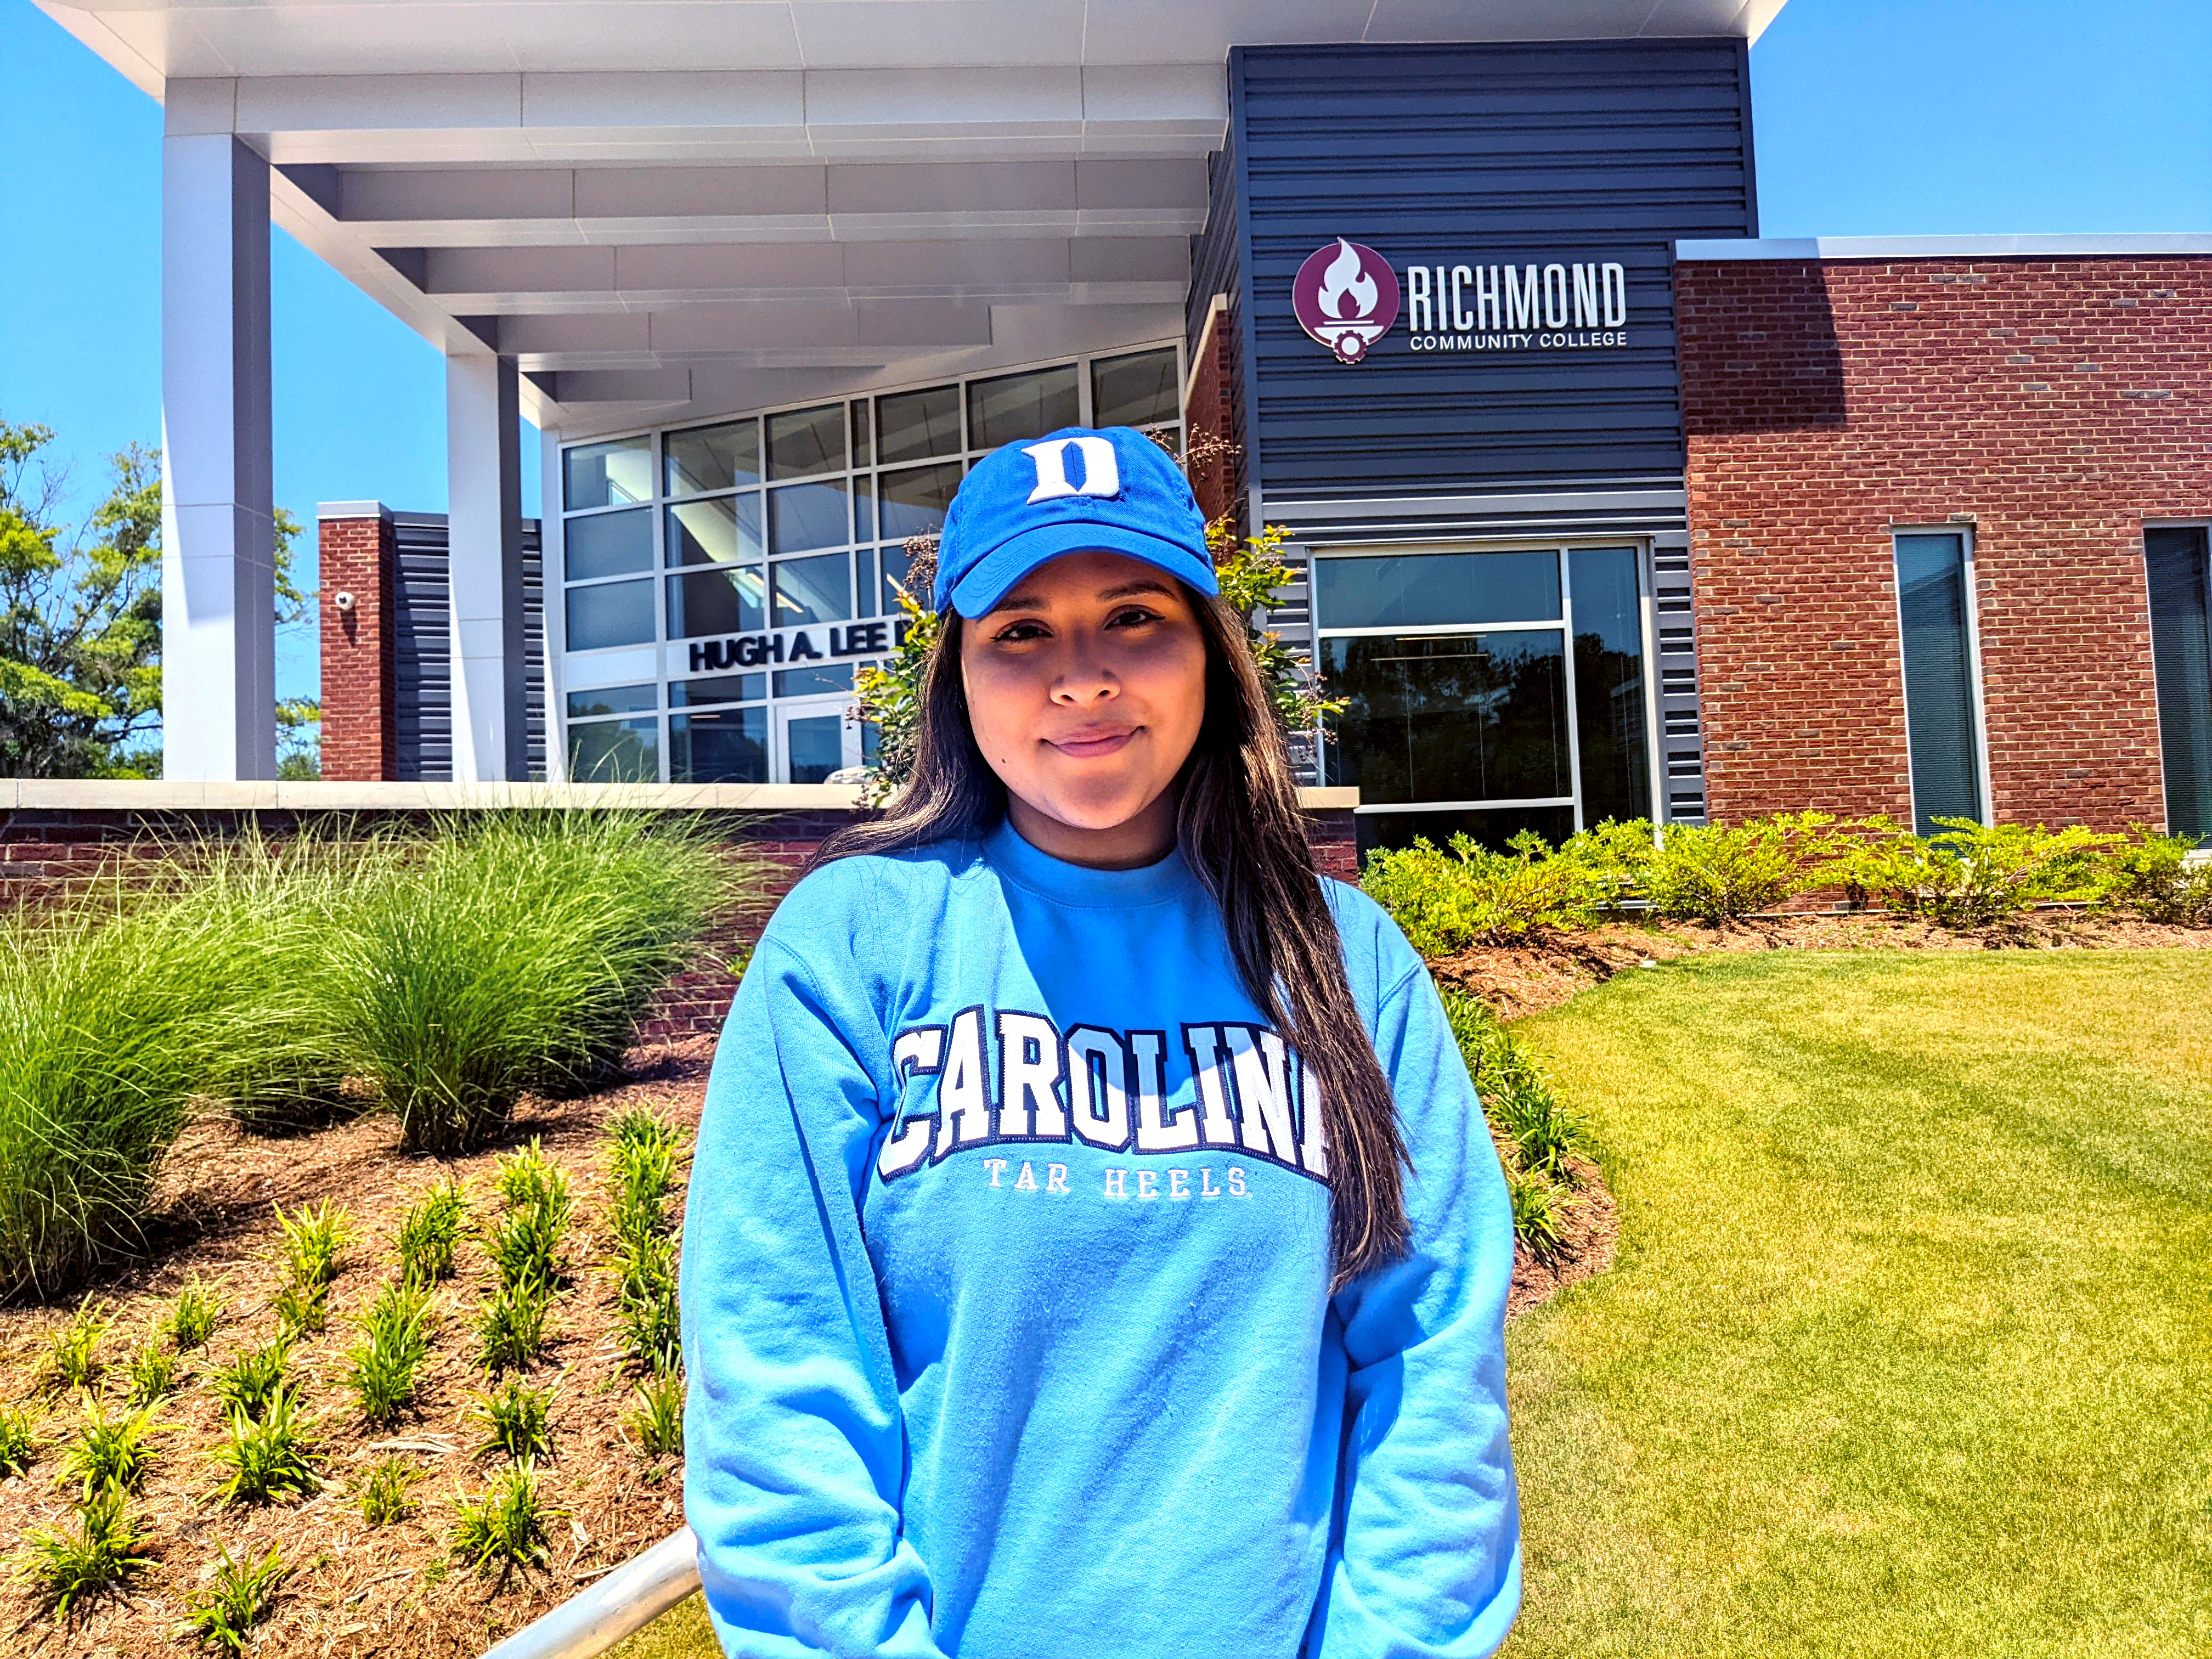 Carolina Mendez wears a Duke hat and a Carolina sweatshirt in front of the Lee Building with RCC logo in background.